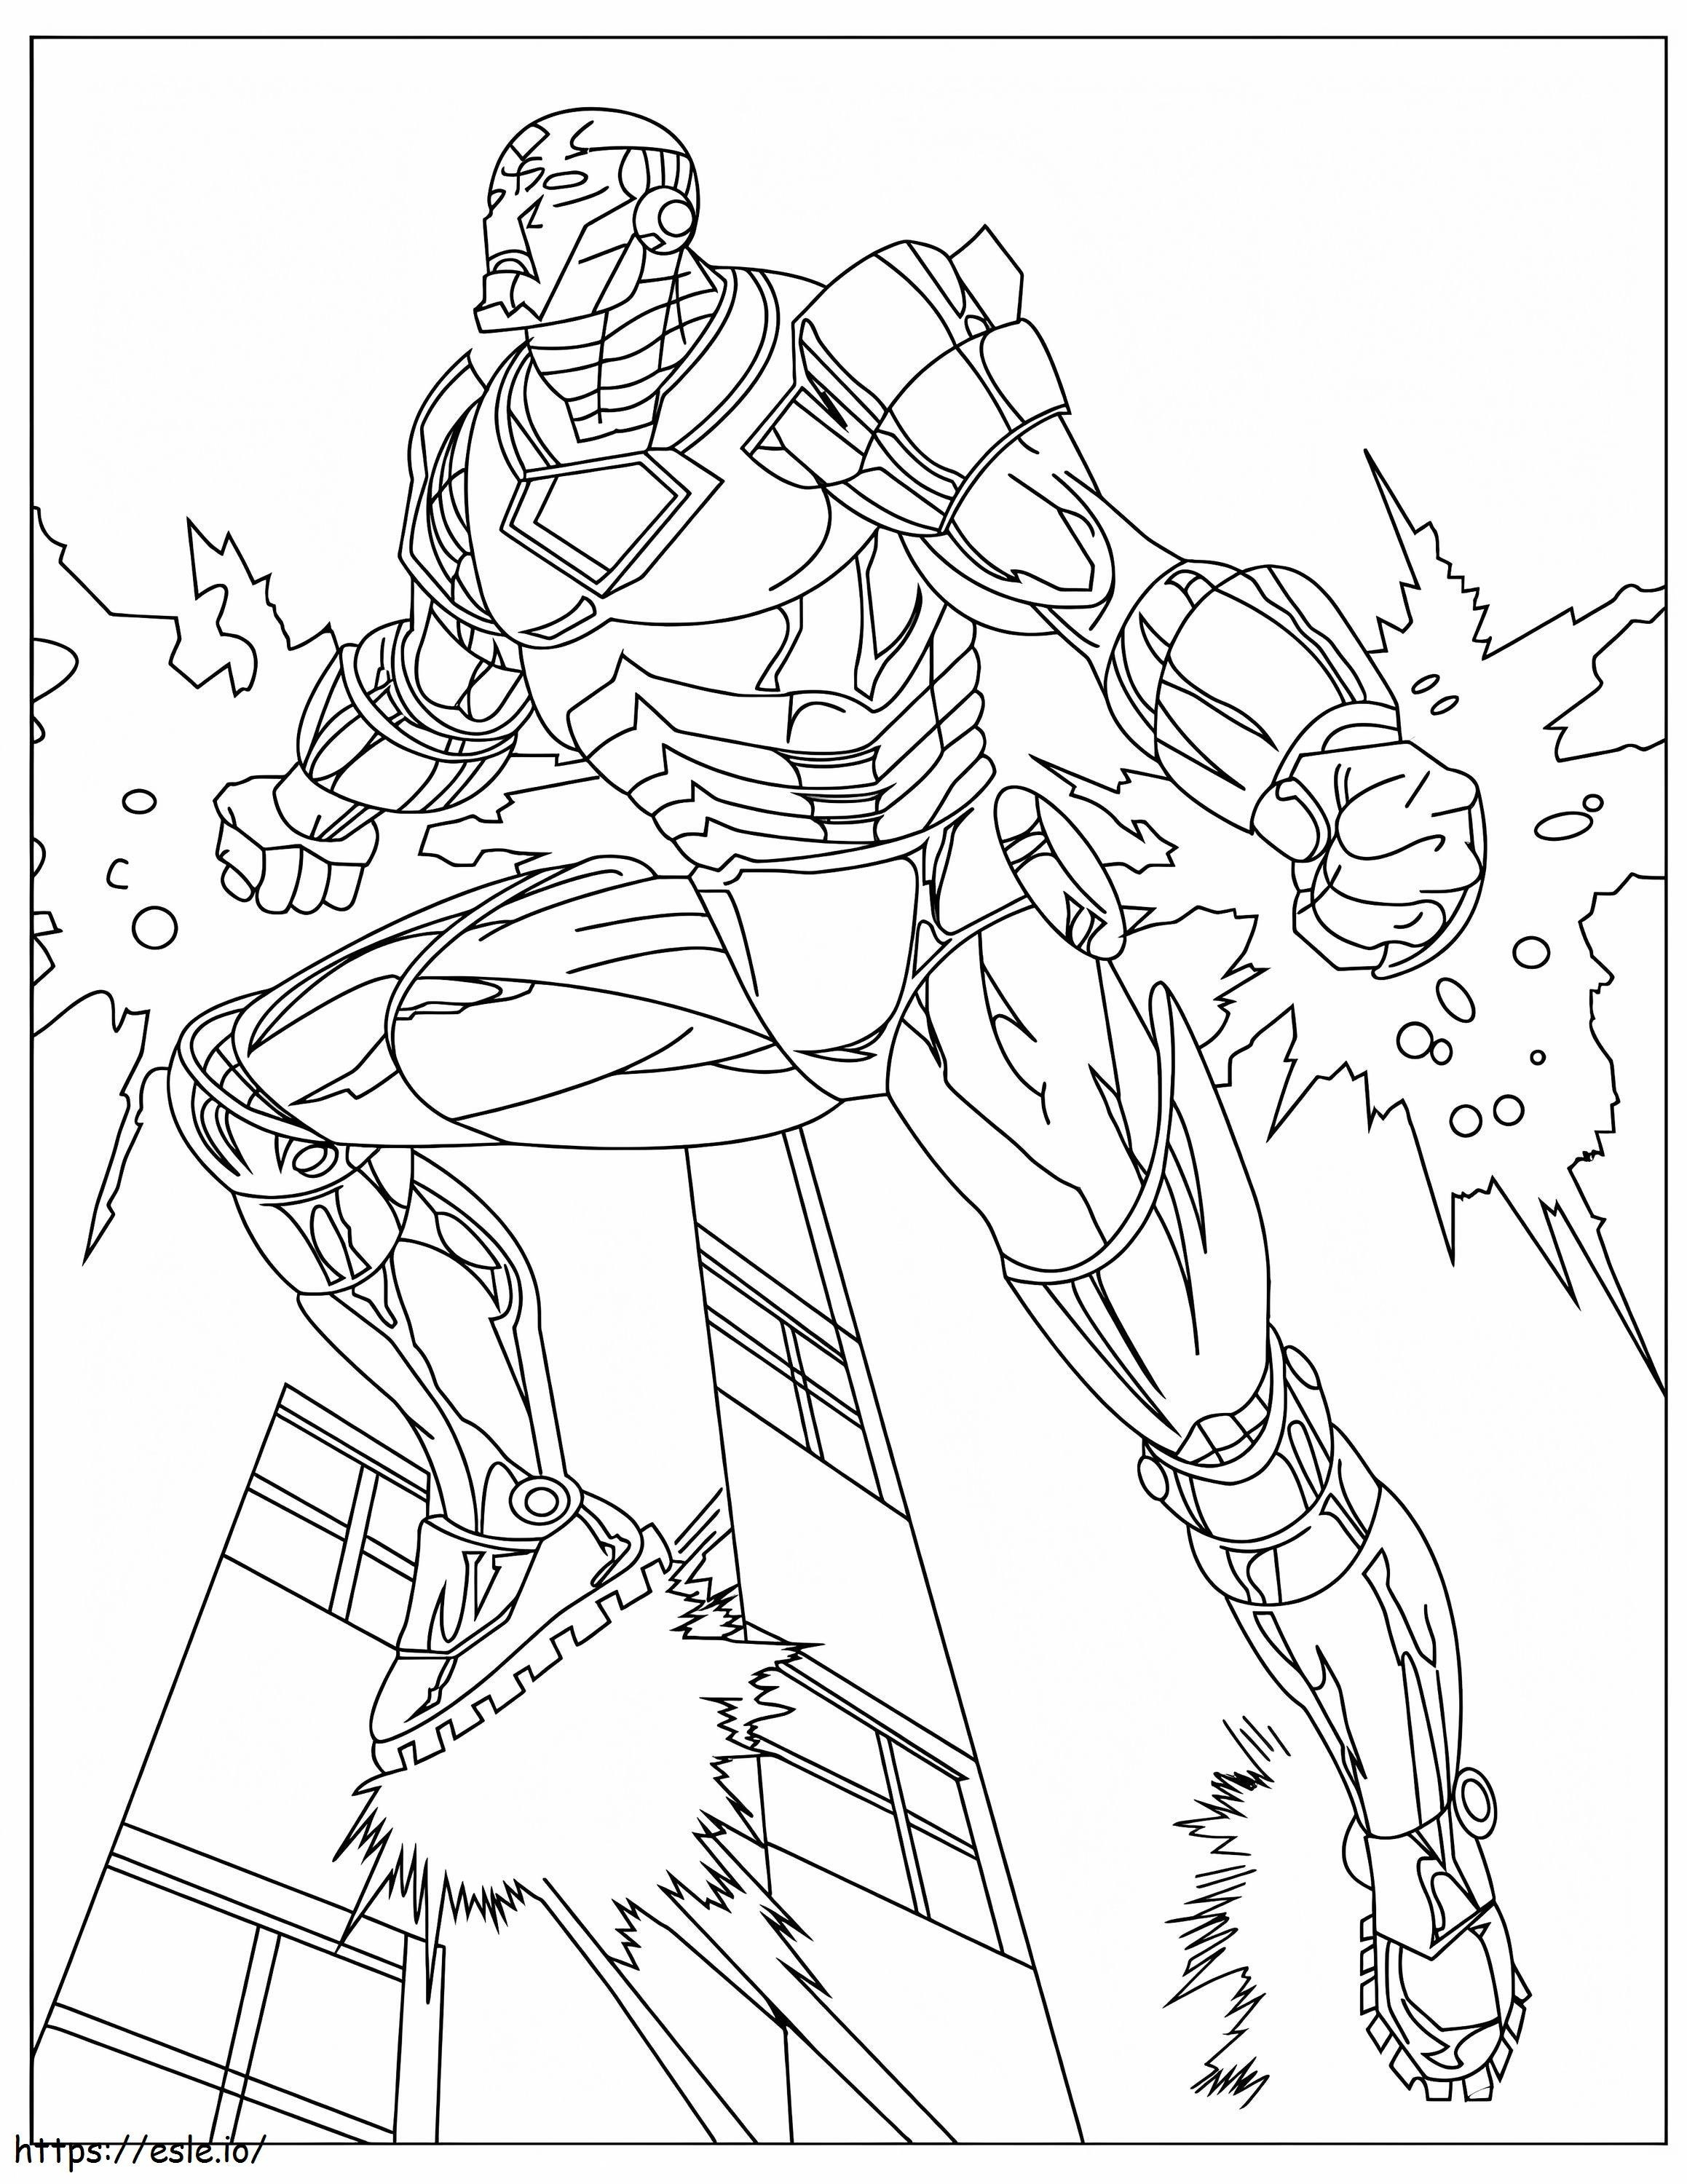 Ironman Flying In The City coloring page